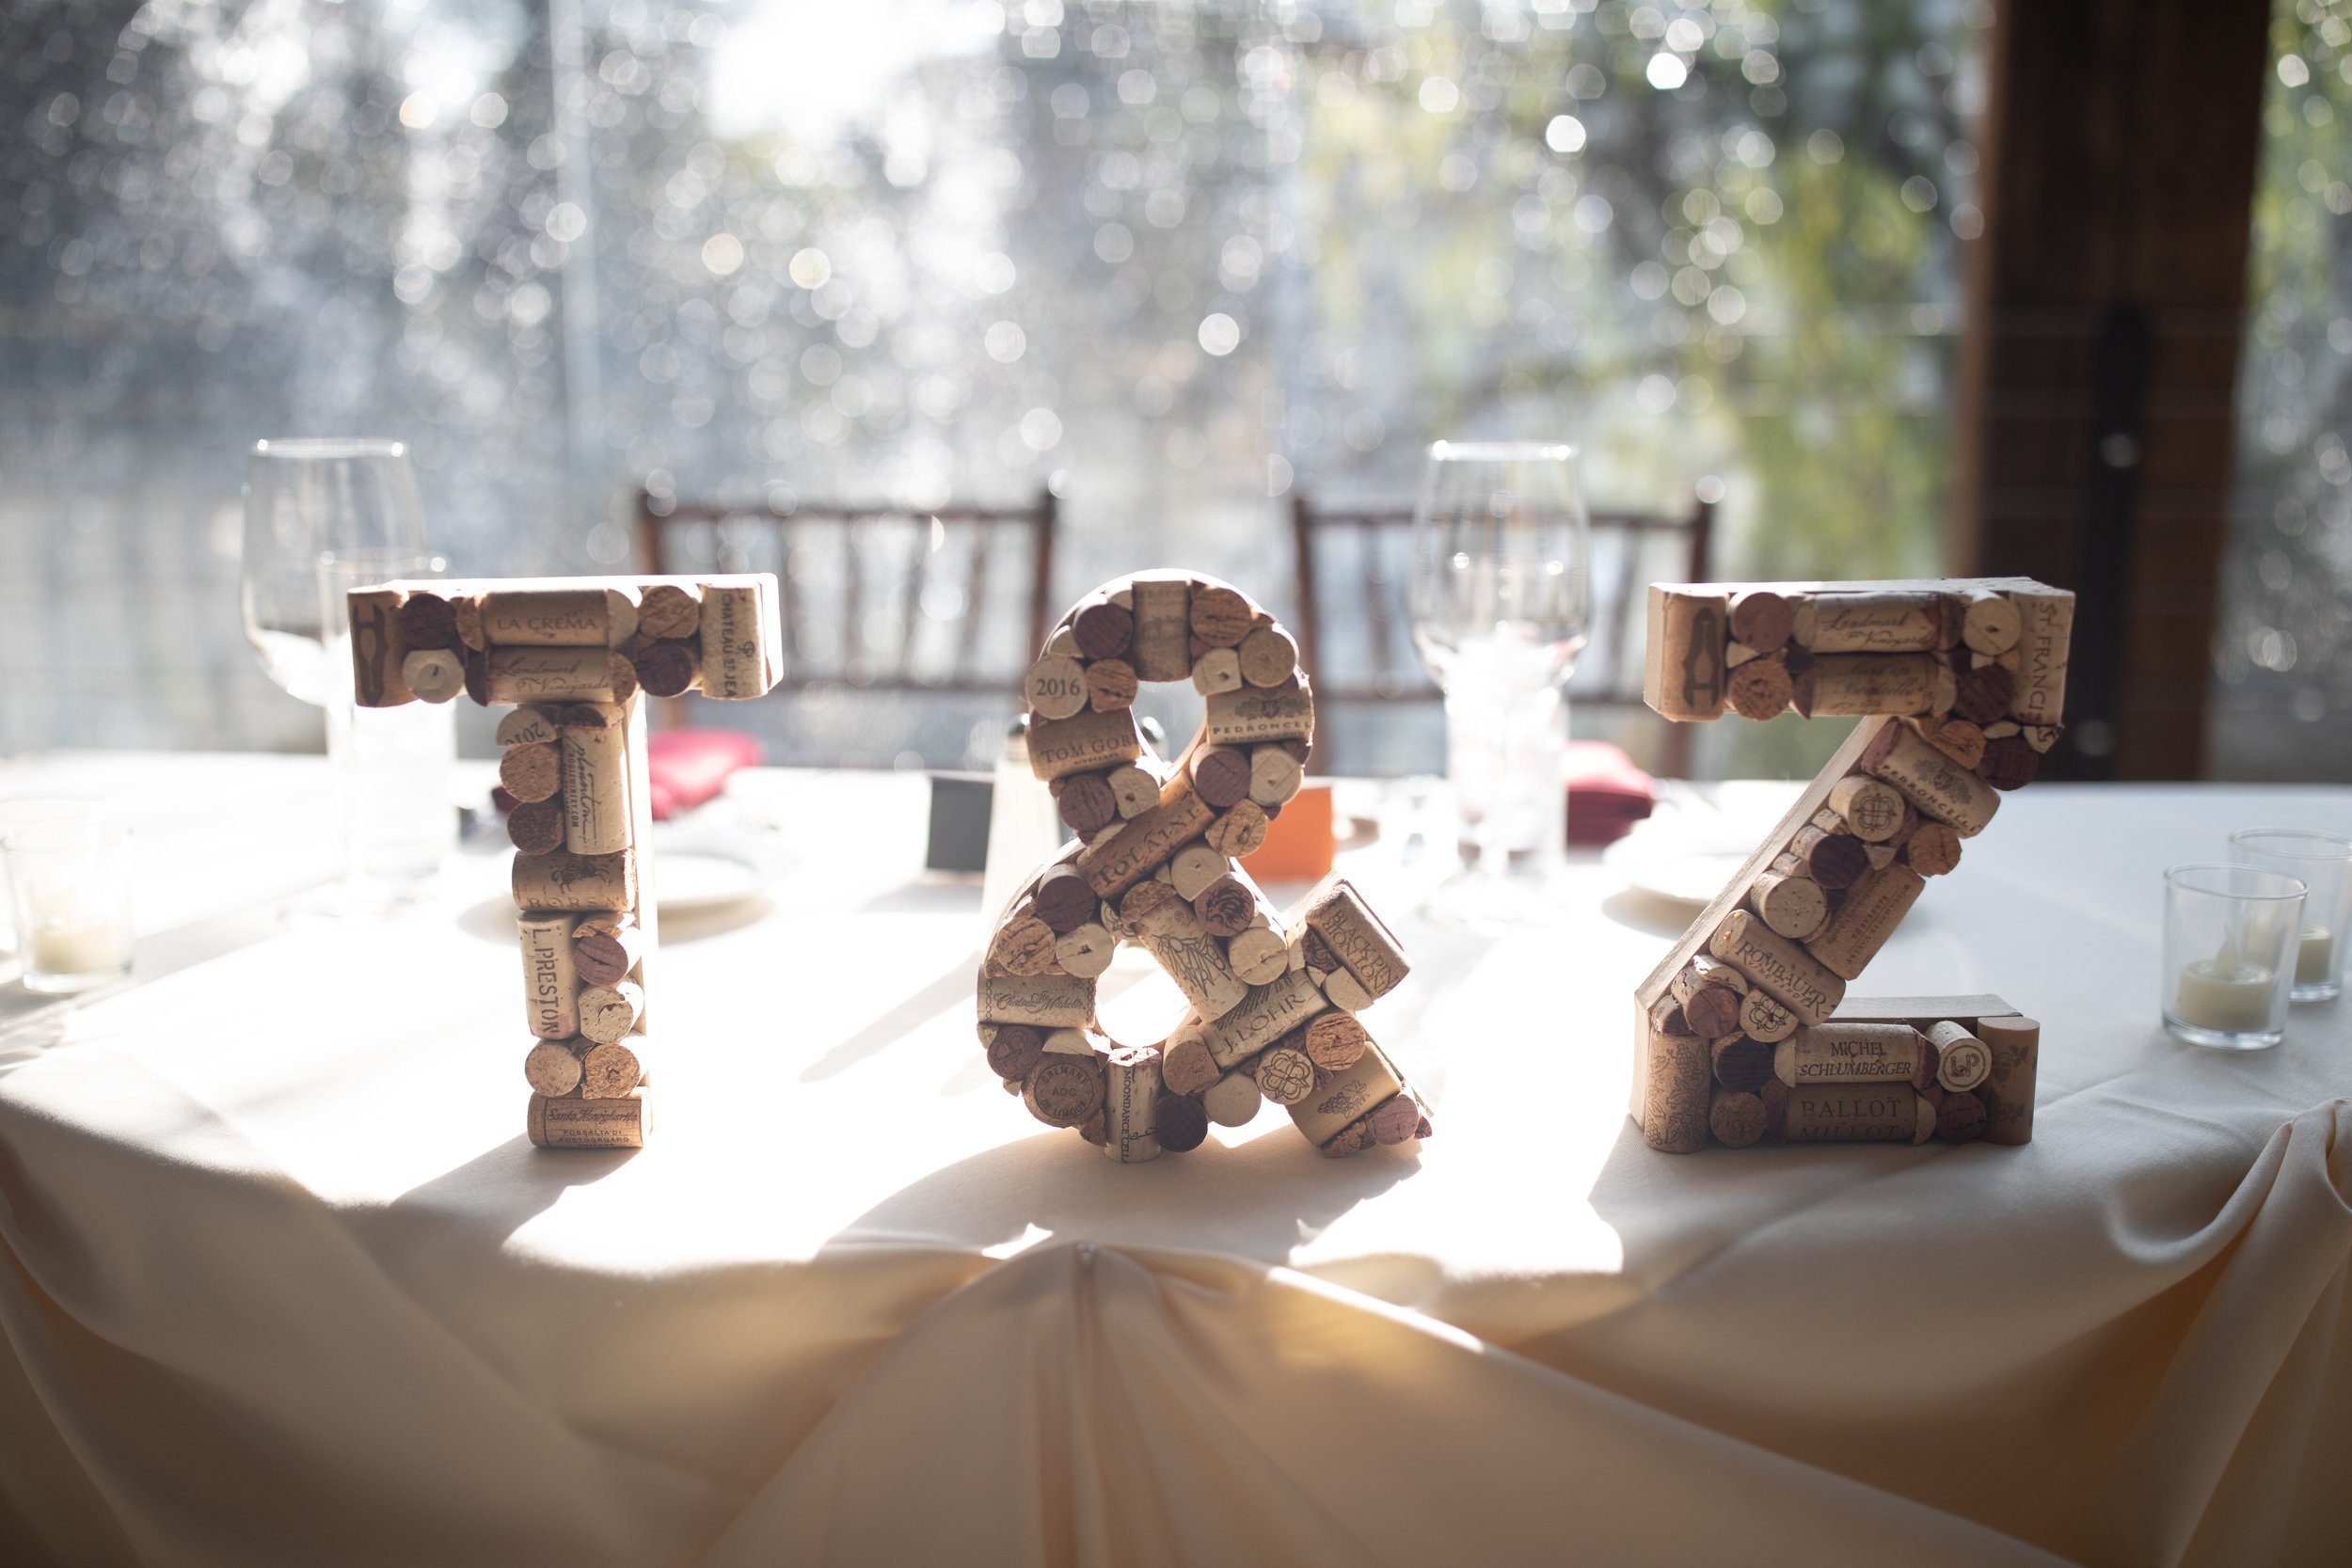 www.santabarbarawedding.com | Calamigos Ranch | Events by Fran | Yanira Scalise | The Exotic Green Garden | Bride and Groom’s Initials Made Out of Wine Corks